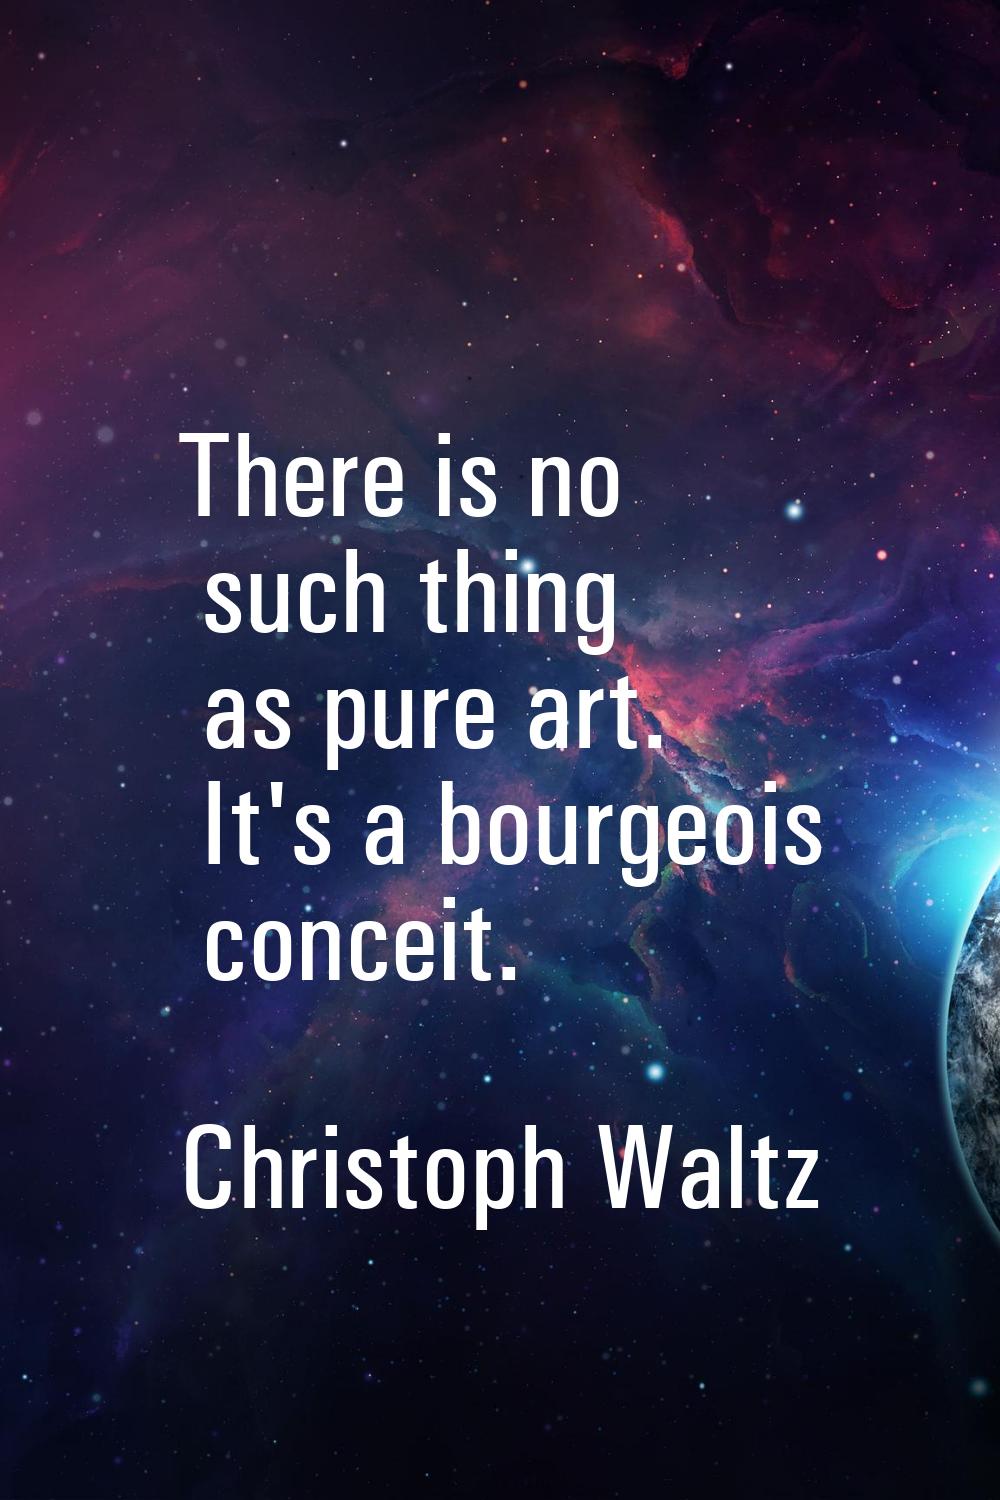 There is no such thing as pure art. It's a bourgeois conceit.